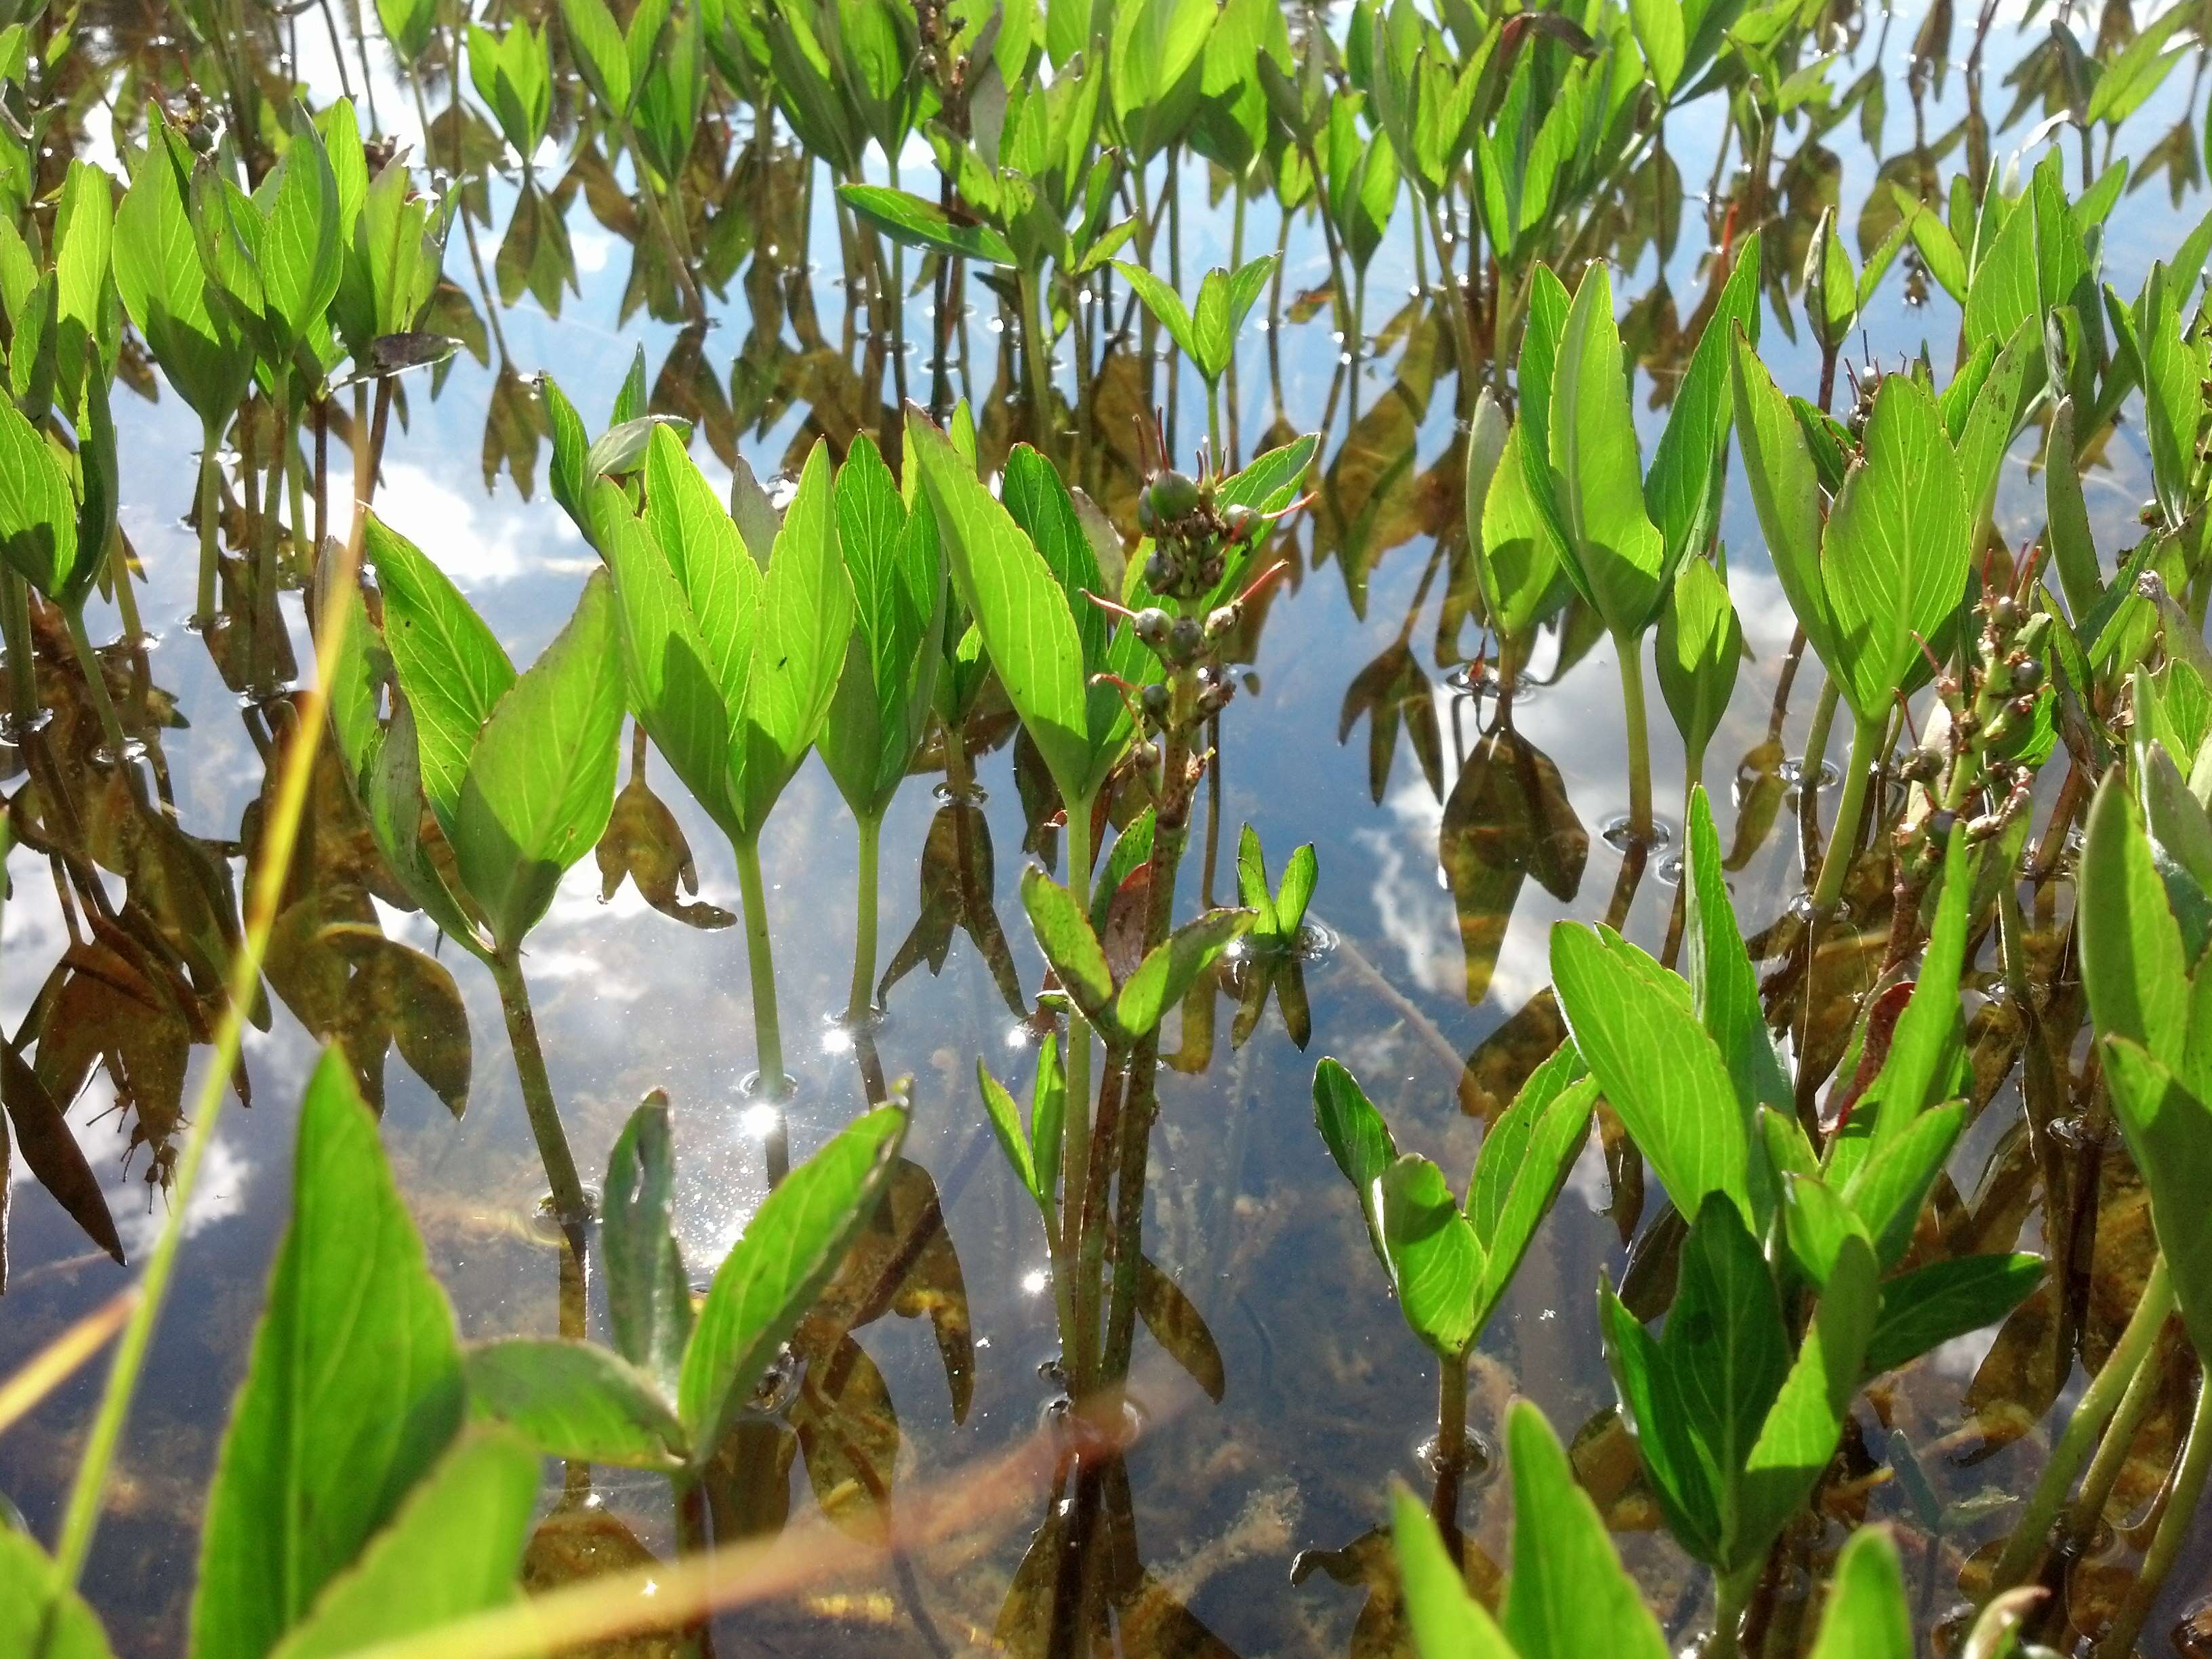 Image of Menyanthes trifoliate